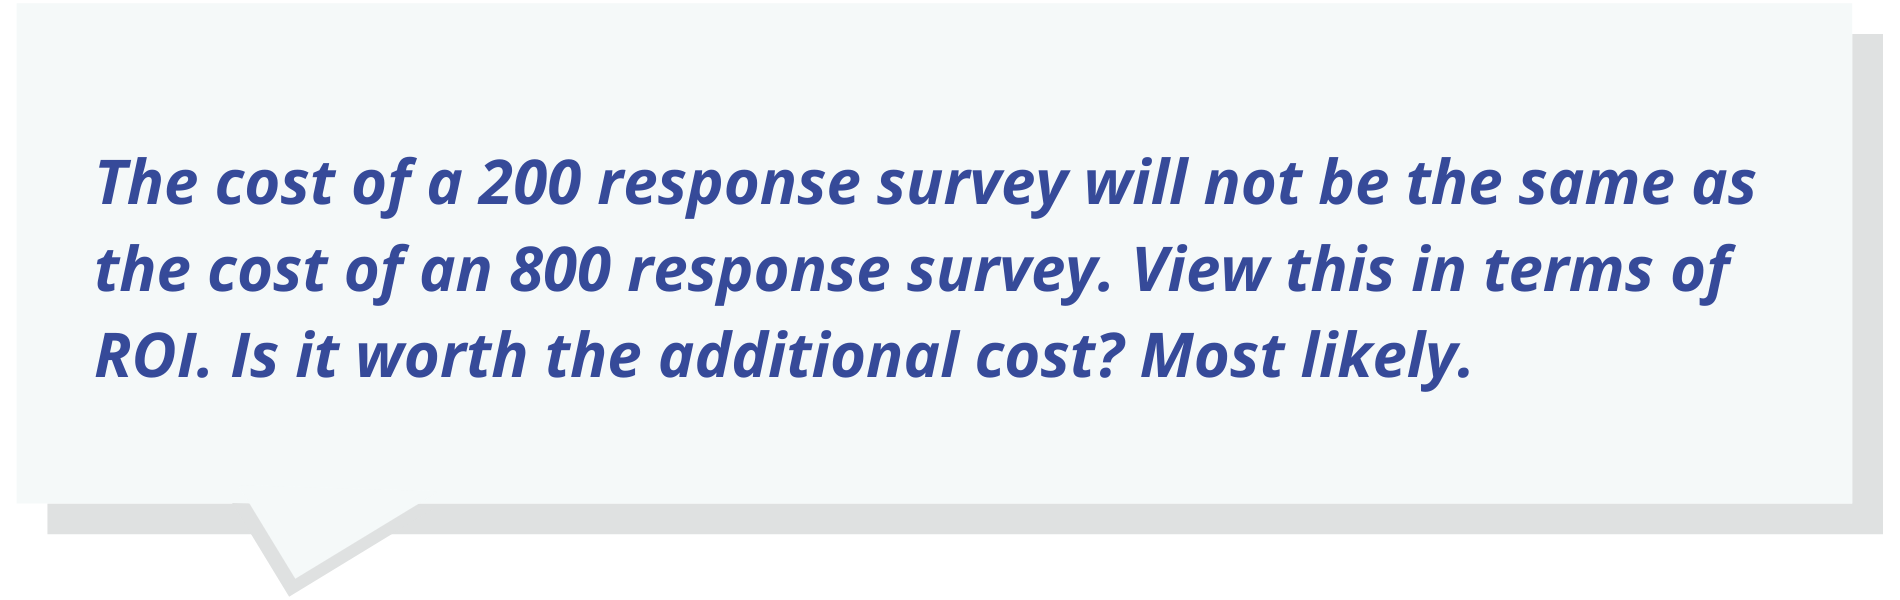 The cost of a 200 response survey will not be the same as the cost of an 800 response survey. View this in terms of ROI. Is it worth the additional cost? Most likely.